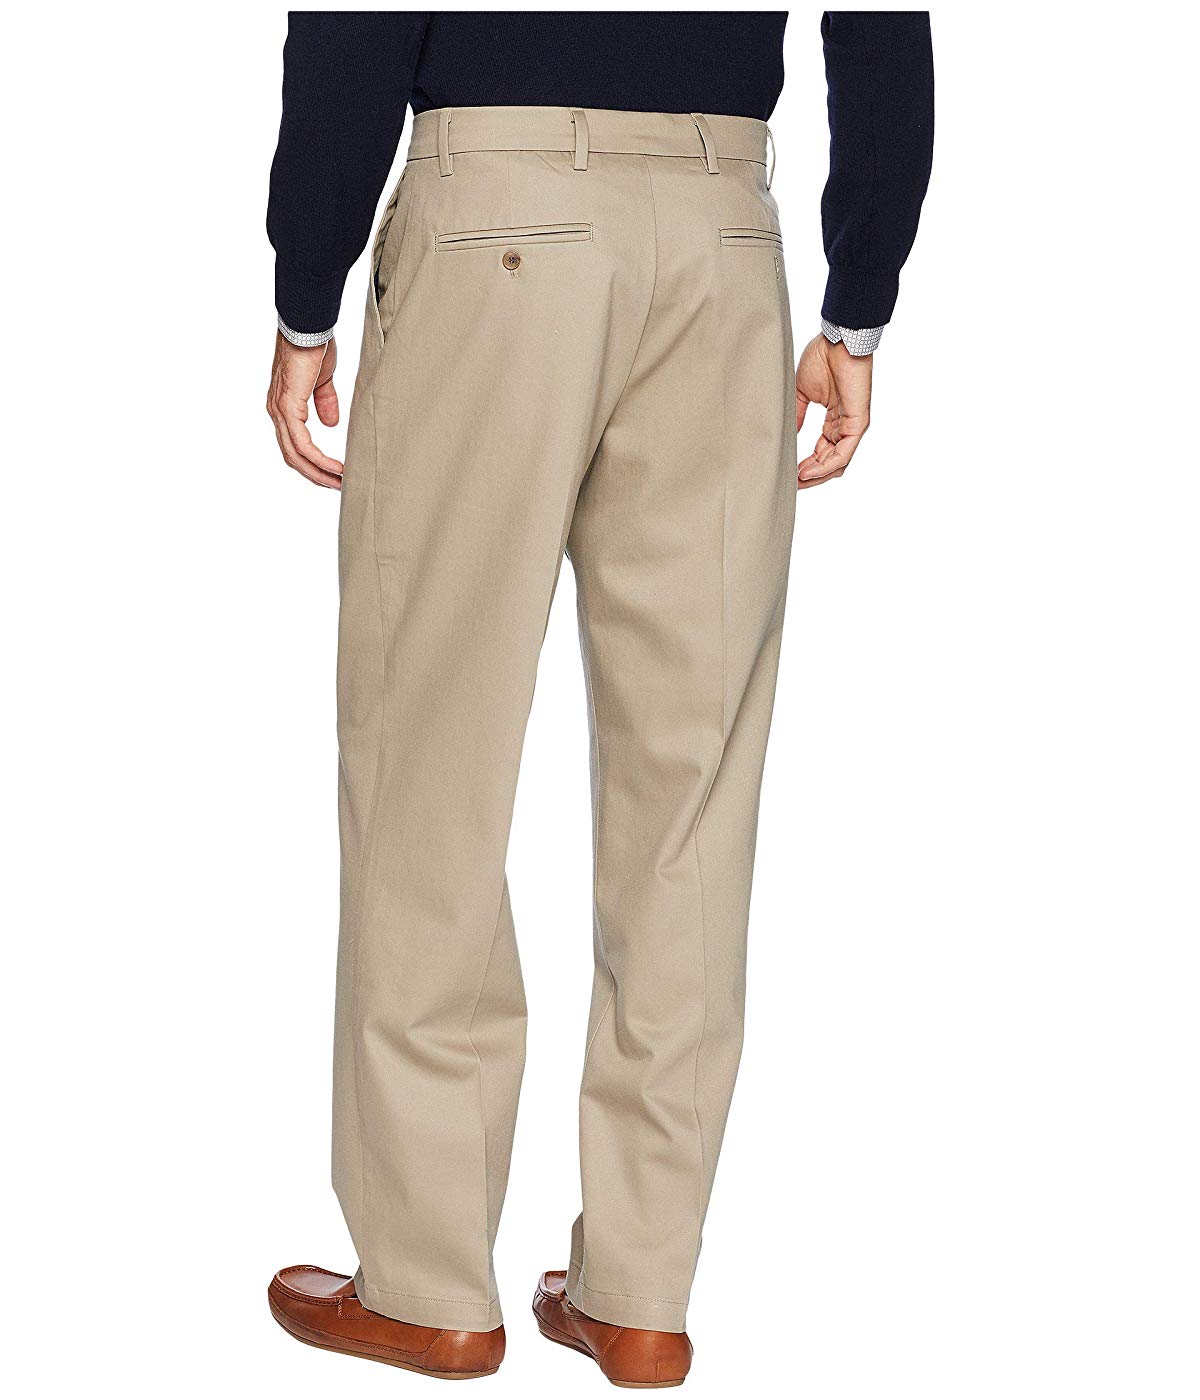 Dockers Men's Relaxed Fit Signature Khaki Lux Cotton Stretch Pants - image 1 of 3